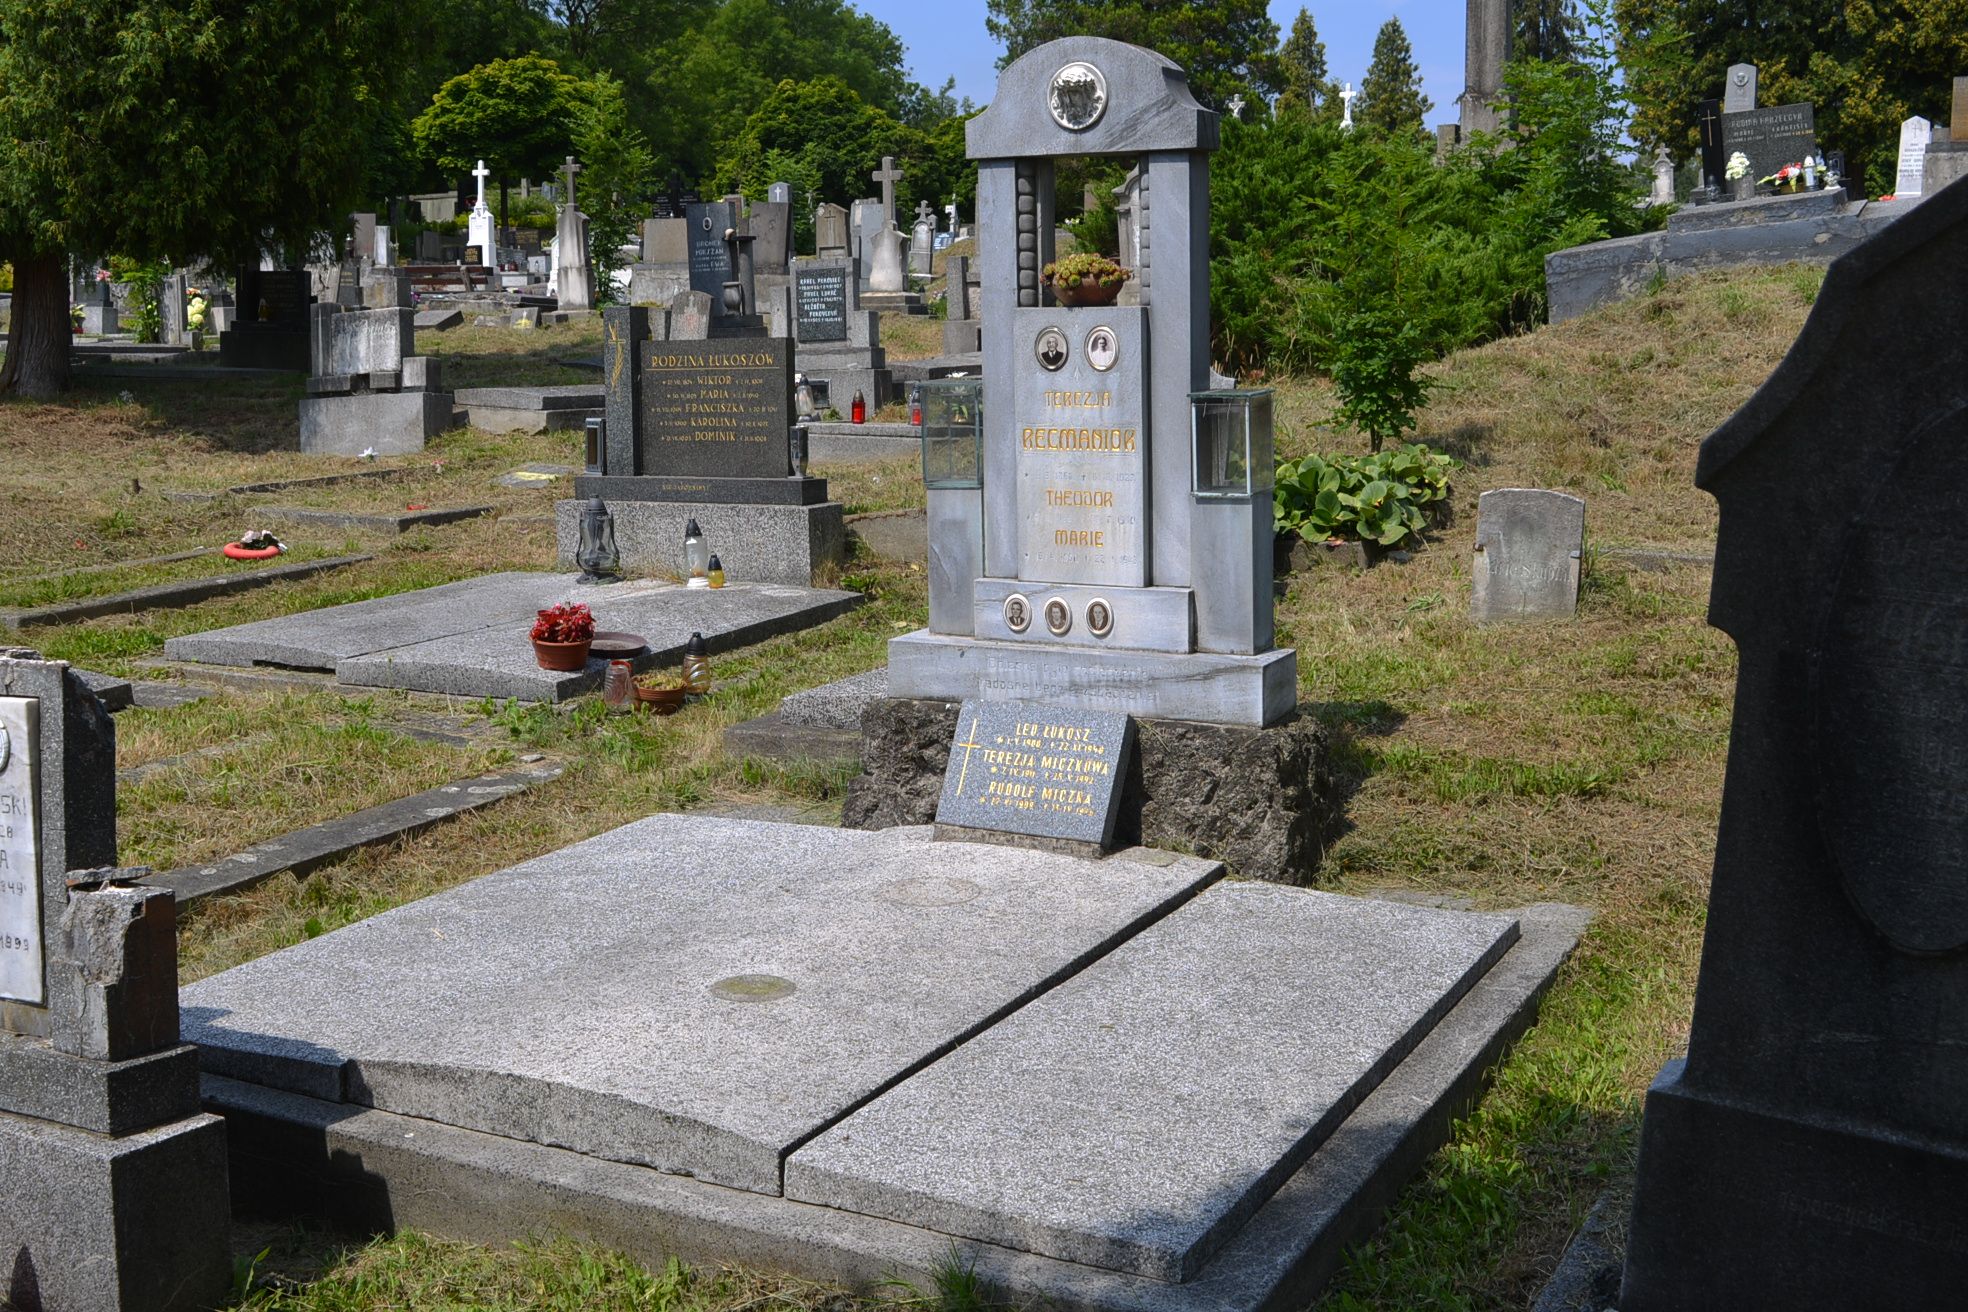 Tomb of the Recmaniok and Miczek families, cemetery in Karviná Doły, Czech Republic, as of 2022